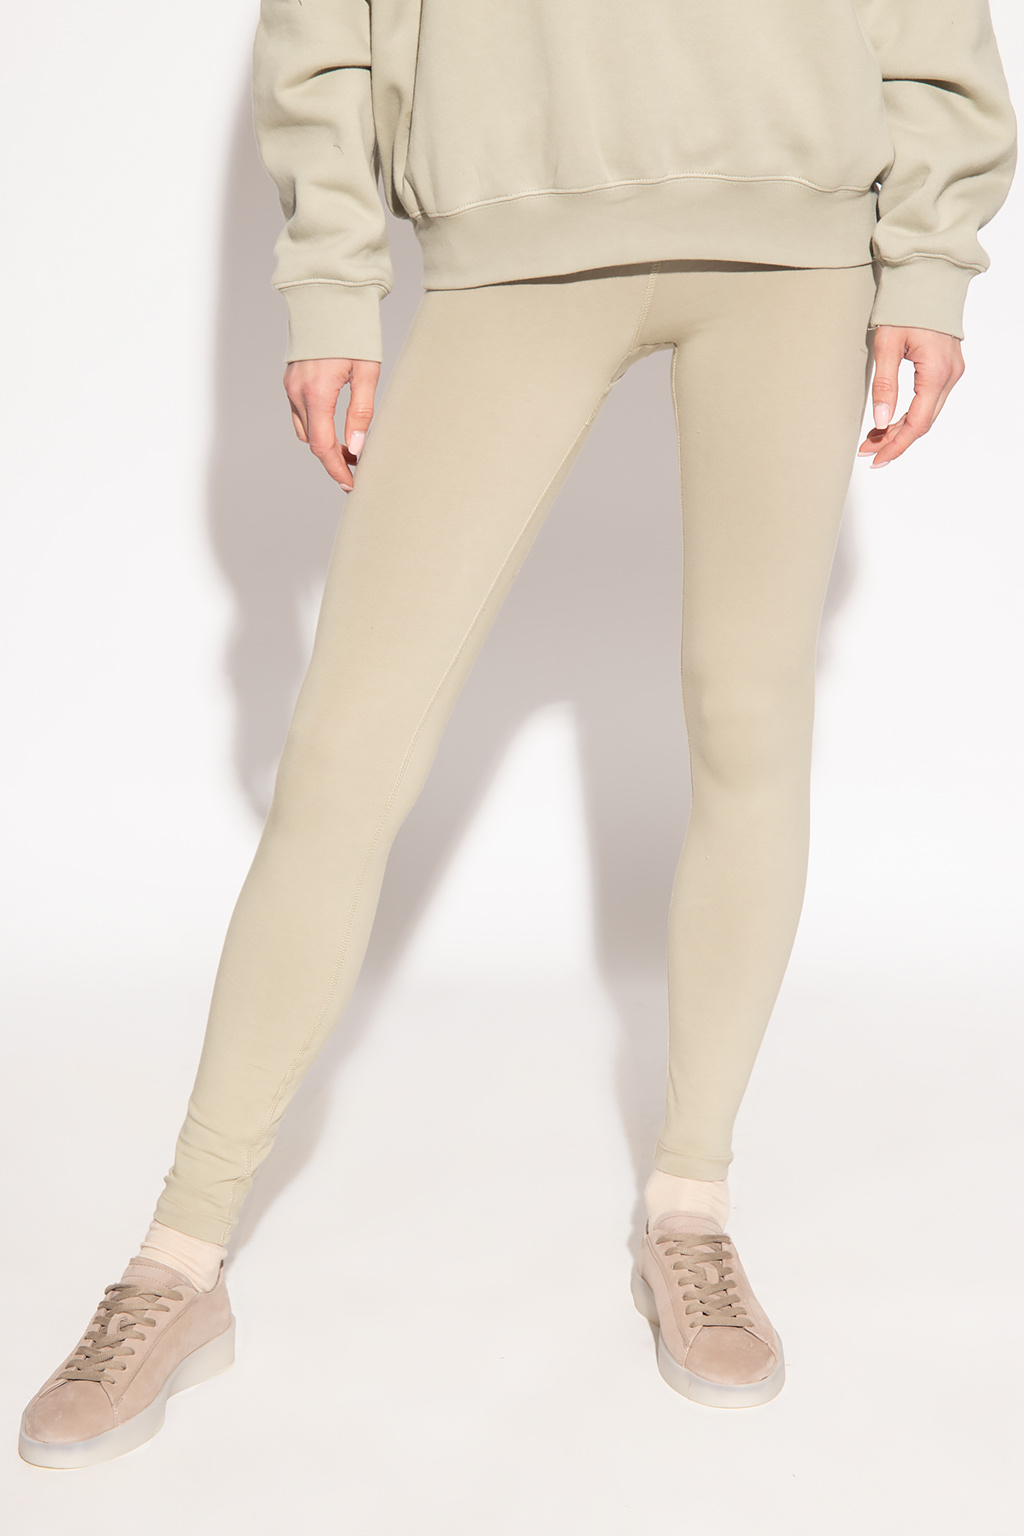 Fear Of God Essentials Leggings with logo, Women's Clothing